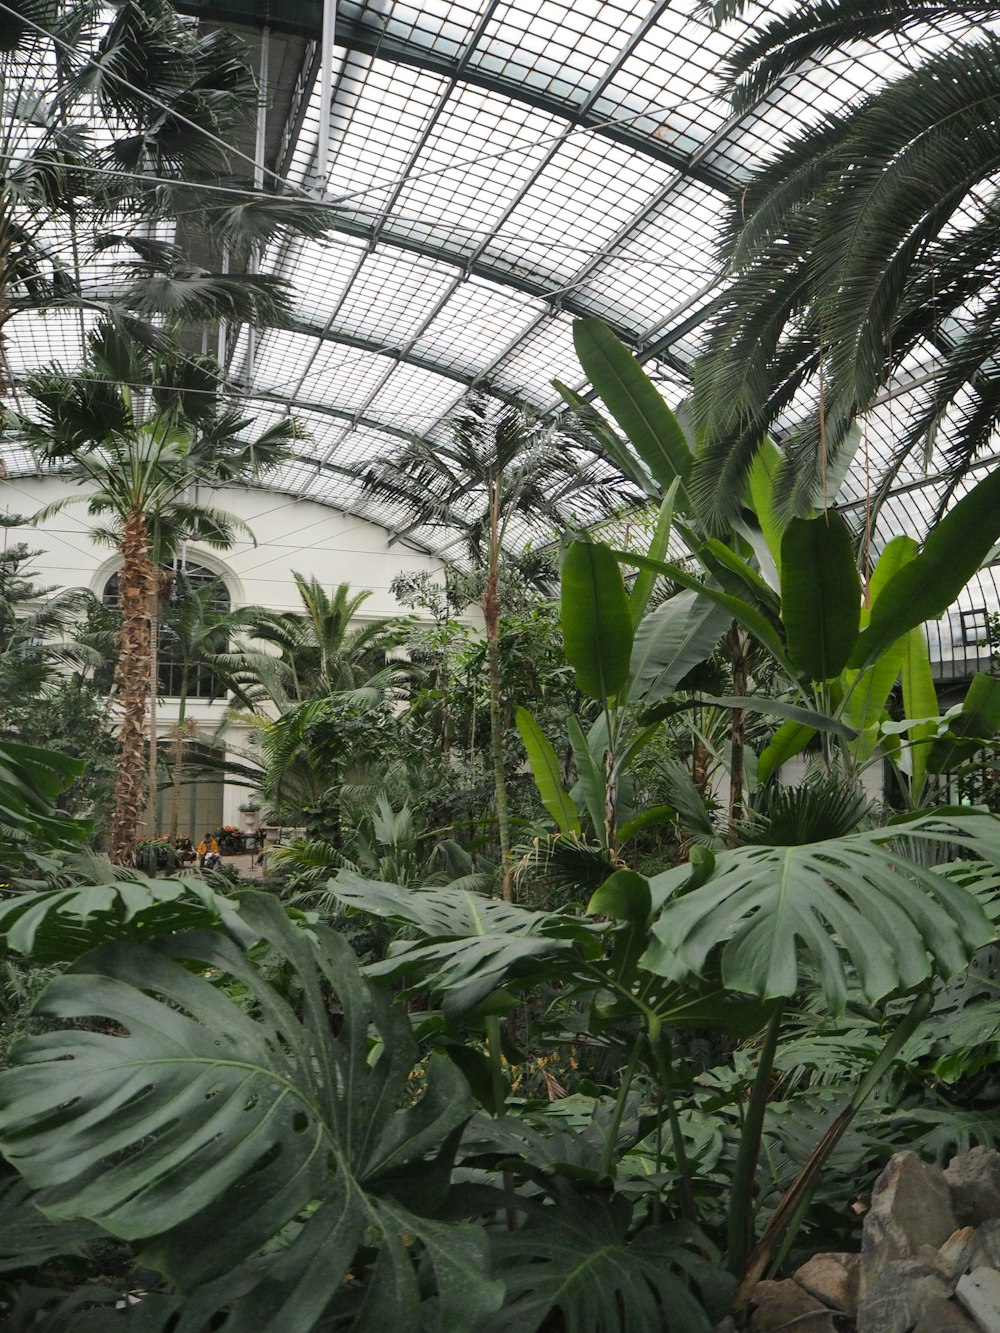 a view of a tropical garden with palm trees